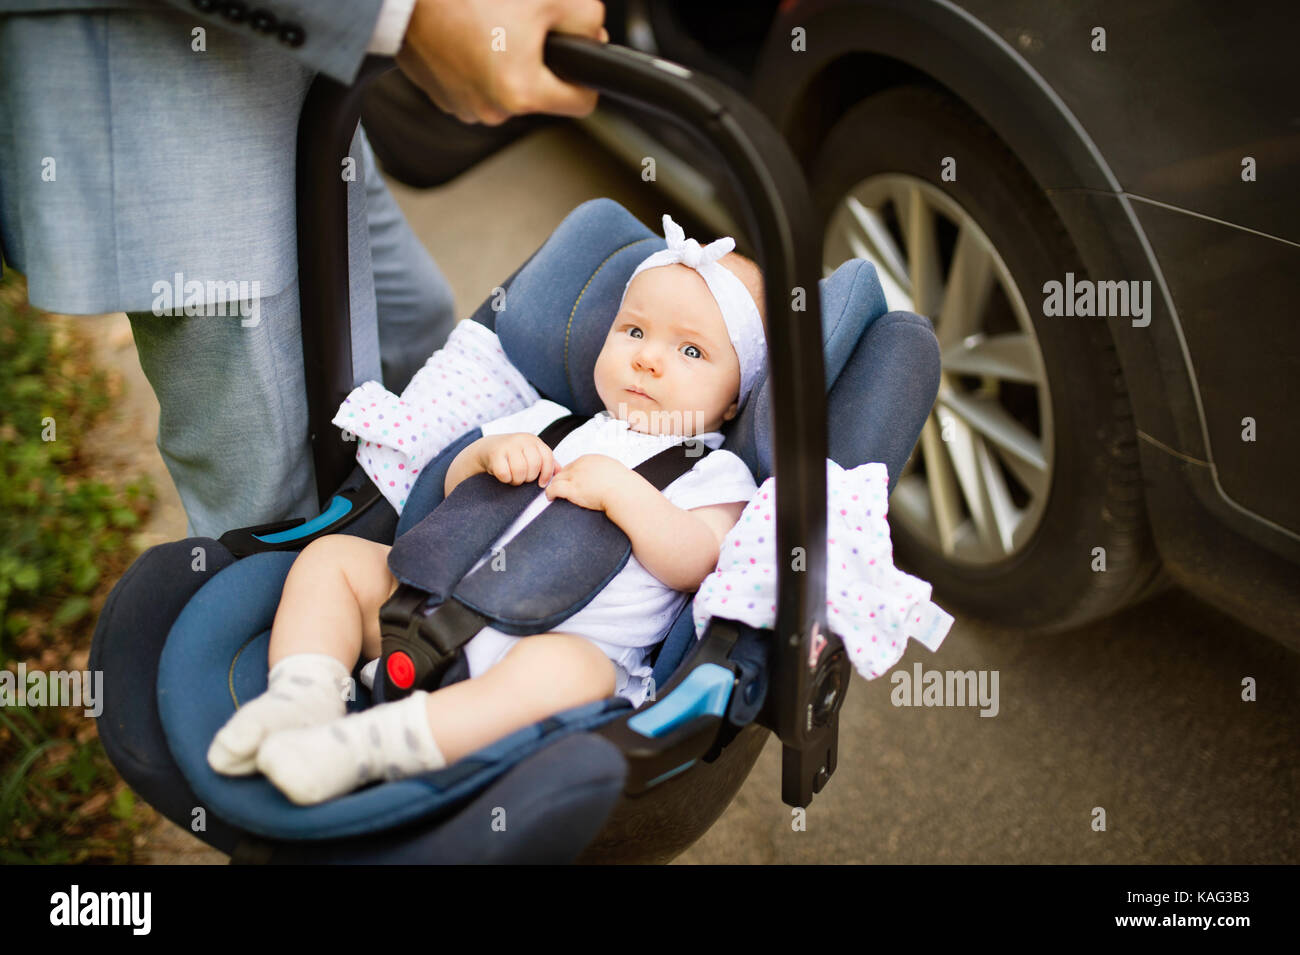 Unrecognizable man carrying his baby girl in a car seat. Stock Photo